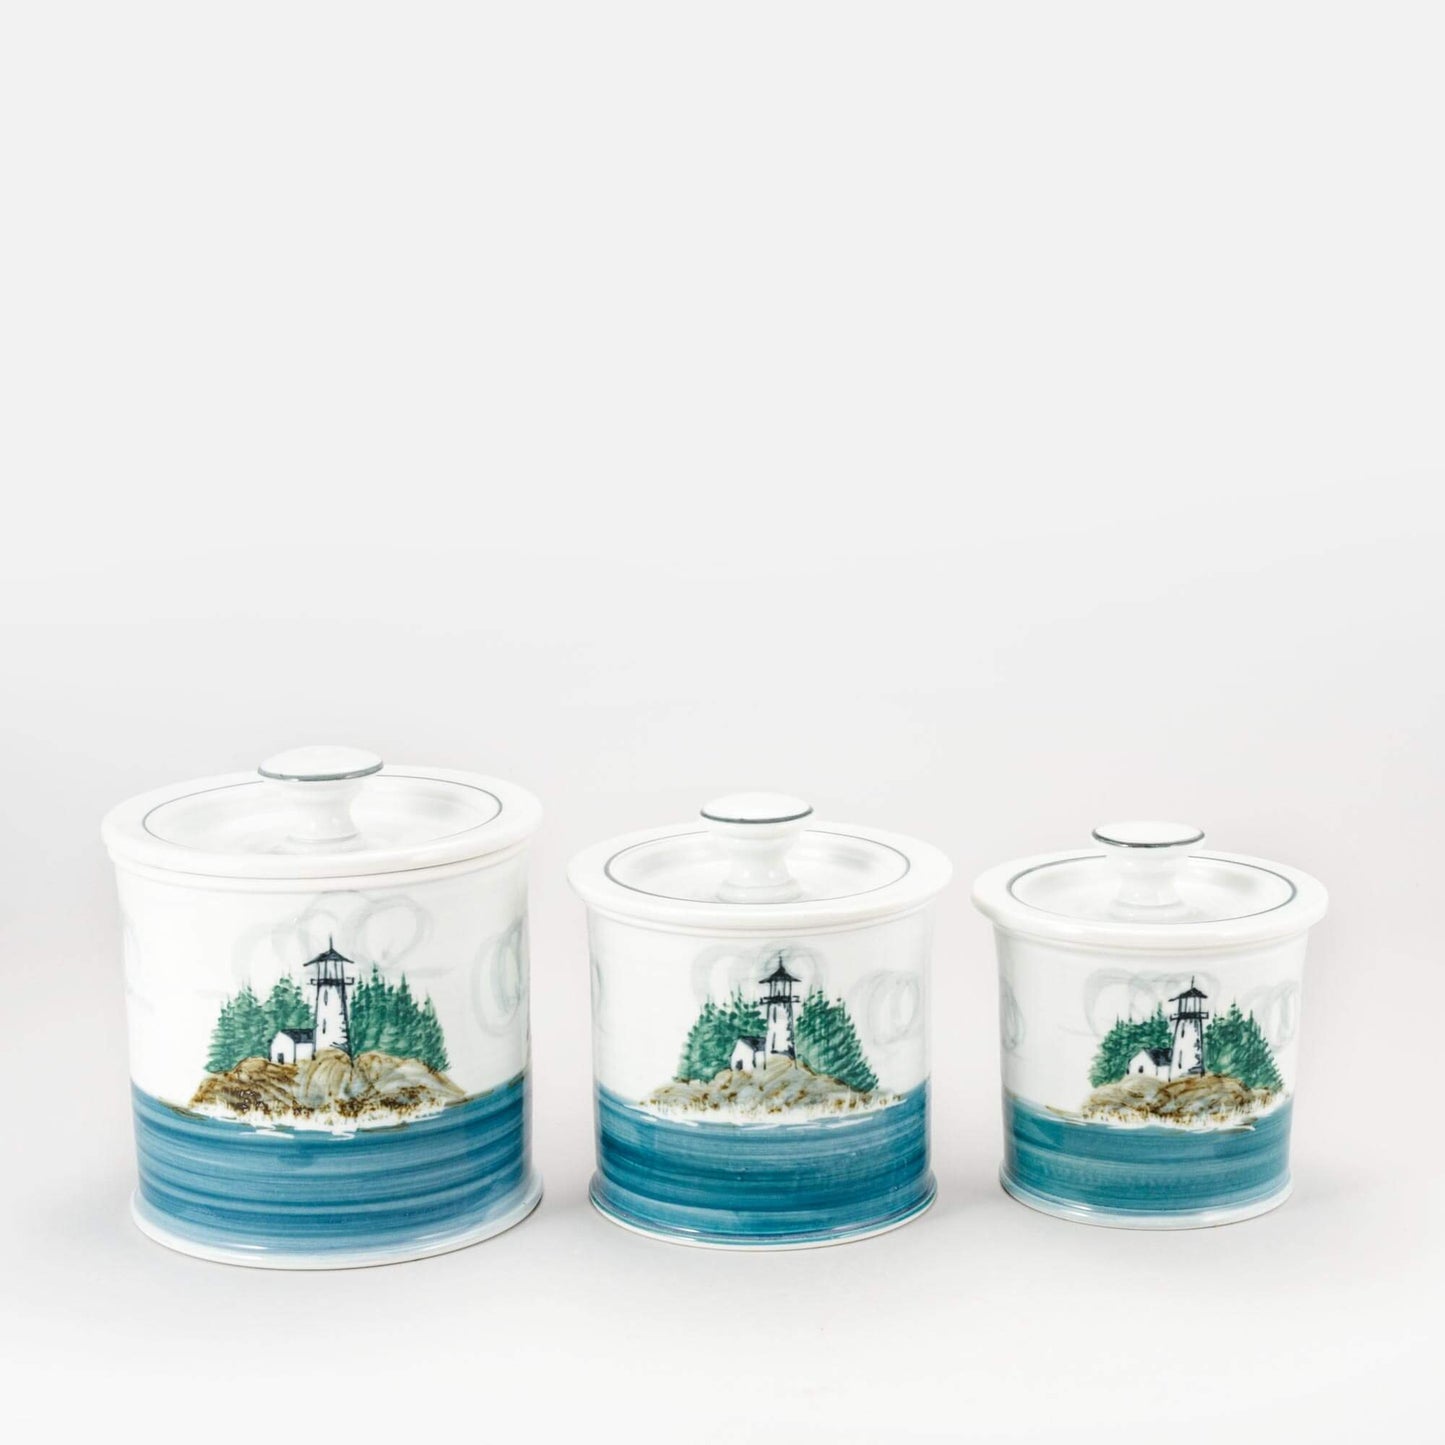 Handmade Pottery Canister Set in Lighthouse pattern made by Georgetown Pottery in Maine